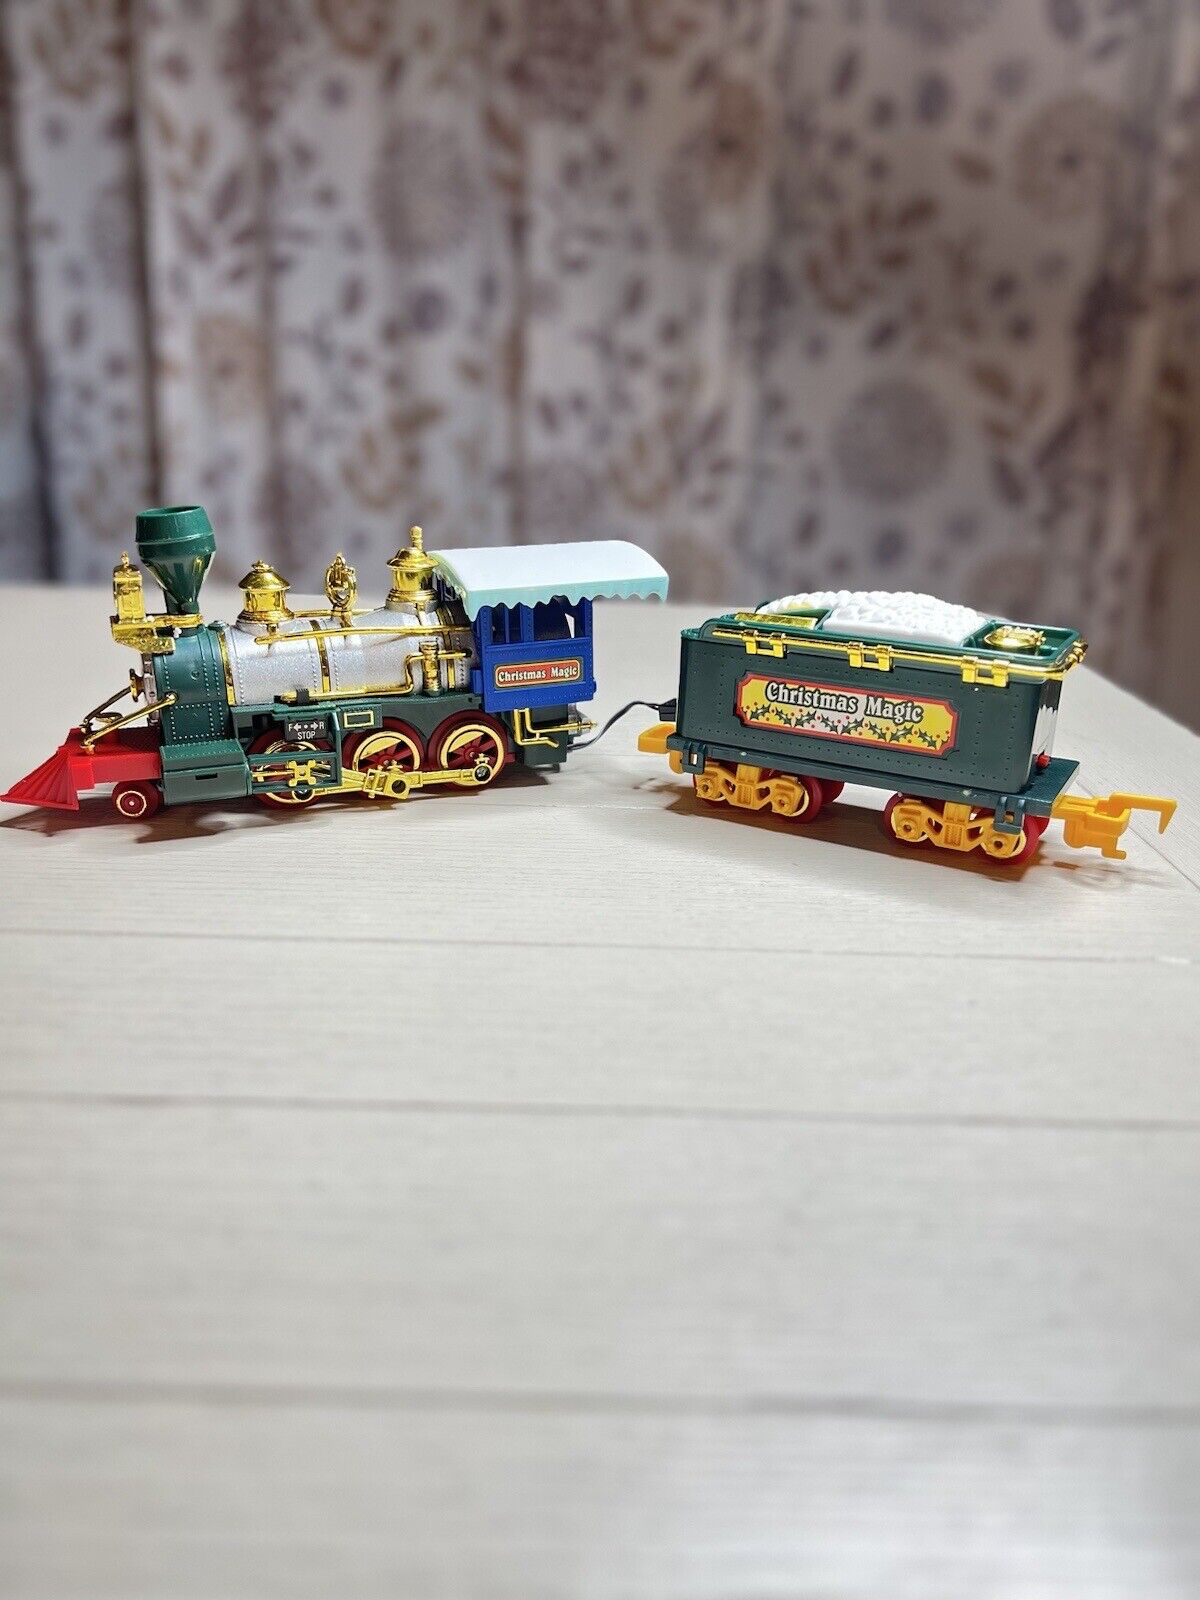 1992 North Pole Christmas Express Steam Engine & Car Replacement